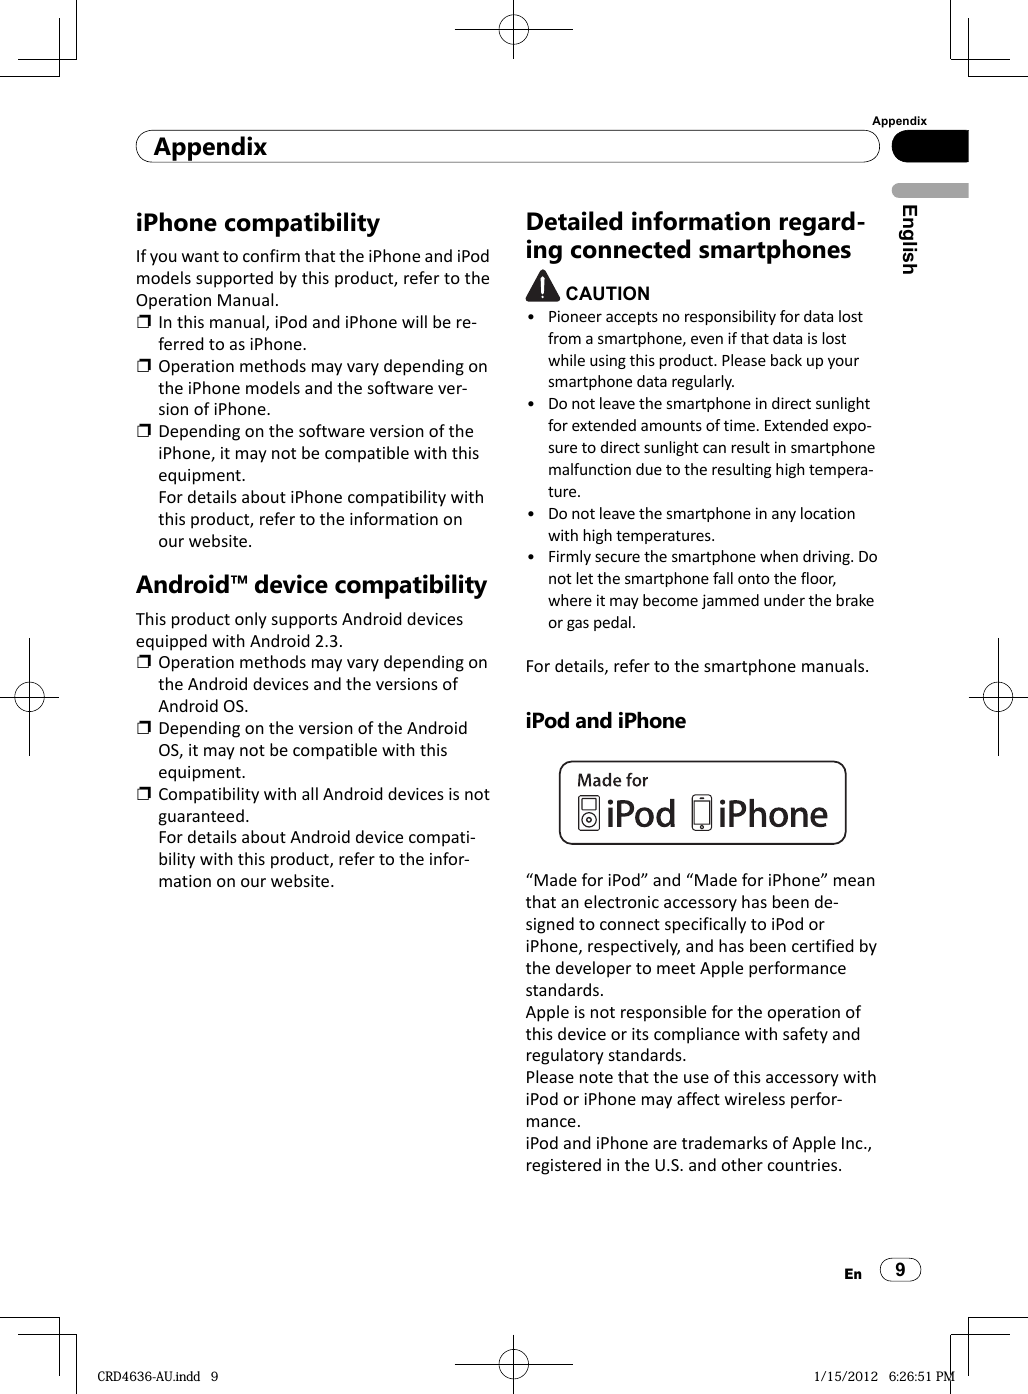 AppendixAppendix9EnEnglishiPhone compatibilityIf you want to confirm that the iPhone and iPod models supported by this product, refer to the Operation Manual.❐  In this manual, iPod and iPhone will be re-ferred to as iPhone.❐  Operation methods may vary depending on the iPhone models and the software ver-sion of iPhone.❐  Depending on the software version of the iPhone, it may not be compatible with this equipment.For details about iPhone compatibility with this product, refer to the information on our website.Android™ device compatibilityThis product only supports Android devices equipped with Android 2.3.❐  Operation methods may vary depending on the Android devices and the versions of Android OS.❐  Depending on the version of the Android OS, it may not be compatible with this equipment.❐  Compatibility with all Android devices is not guaranteed.  For details about Android device compati-bility with this product, refer to the infor-mation on our website.Detailed information regard-ing connected smartphones CAUTIONPioneer accepts no responsibility for data lost from a smartphone, even if that data is lost while using this product. Please back up your smartphone data regularly.Do not leave the smartphone in direct sunlight for extended amounts of time. Extended expo-sure to direct sunlight can result in smartphone malfunction due to the resulting high tempera-ture.Do not leave the smartphone in any location with high temperatures.Firmly secure the smartphone when driving. Do not let the smartphone fall onto the floor, where it may become jammed under the brake or gas pedal.For details, refer to the smartphone manuals.iPod and iPhone“Made for iPod” and “Made for iPhone” mean  that an electronic accessory has been de-signed to connect specifically to iPod or iPhone, respectively, and has been certified by the developer to meet Apple performance standards.Apple is not responsible for the operation of this device or its compliance with safety and regulatory standards.Please note that the use of this accessory with iPod or iPhone may affect wireless perfor-mance.iPod and iPhone are trademarks of Apple Inc., registered in the U.S. and other countries.••••CRD4636-AU.indd   9CRD4636-AU.indd   9 1/15/2012   6:26:51 PM1/15/2012   6:26:51 PM